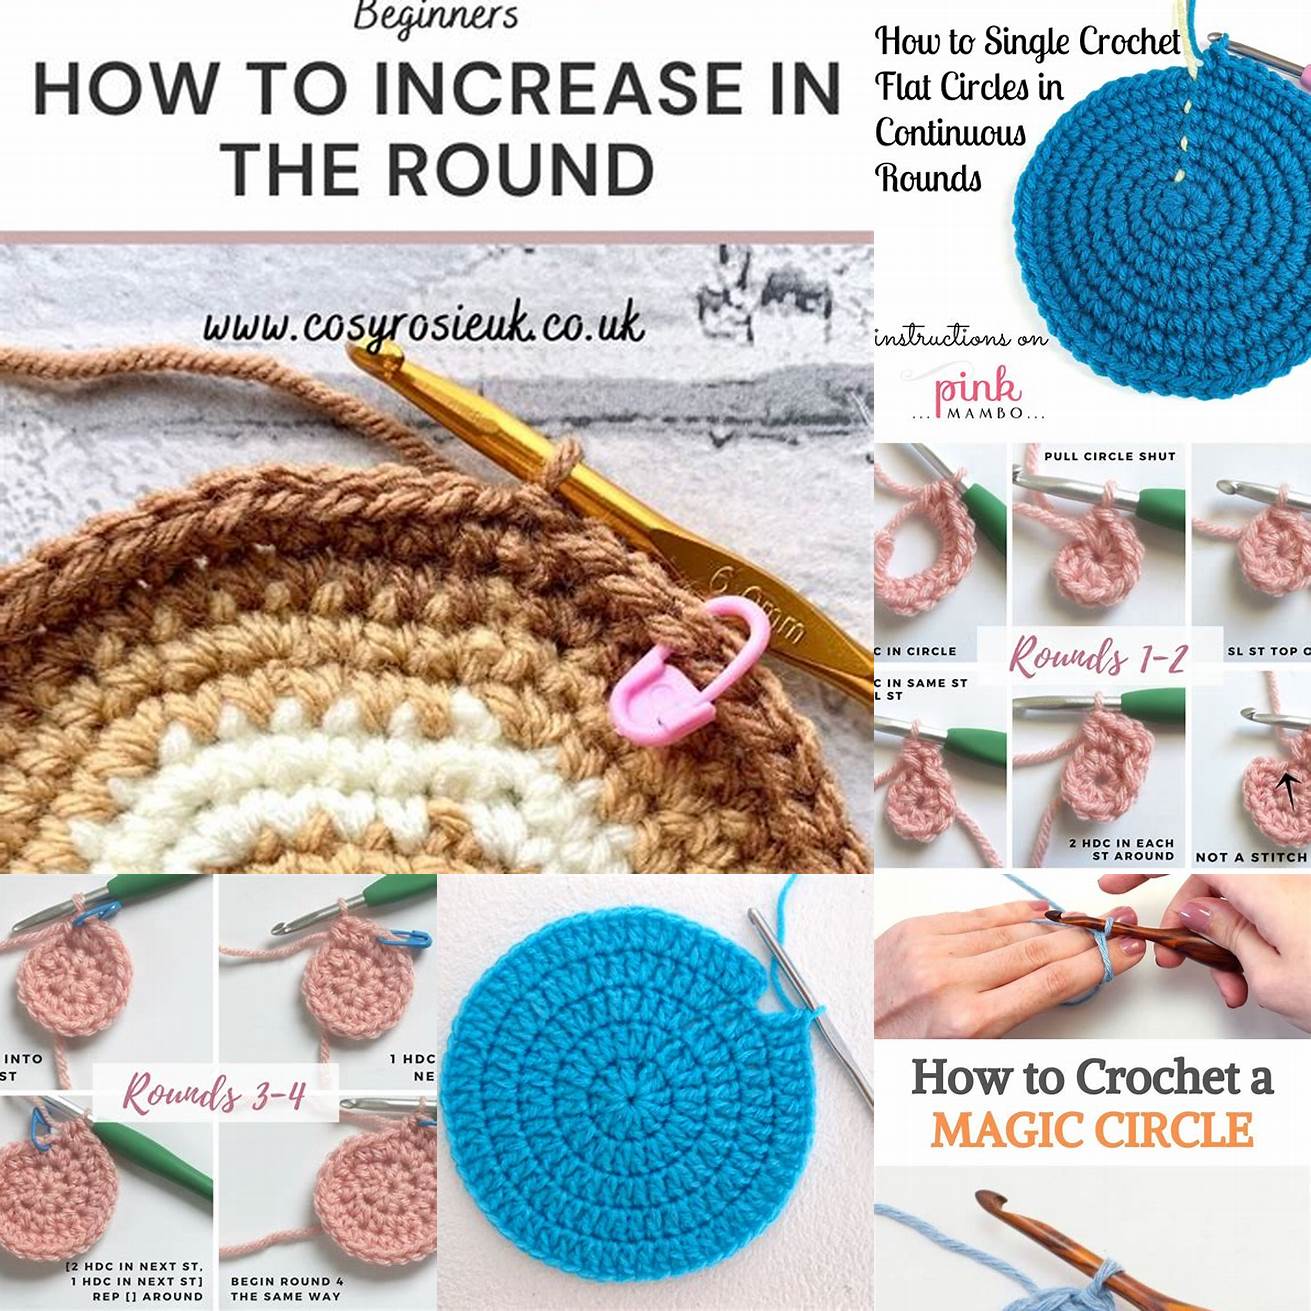 Continue crocheting in the round increasing the number of single crochets in each round until your coaster reaches the desired size